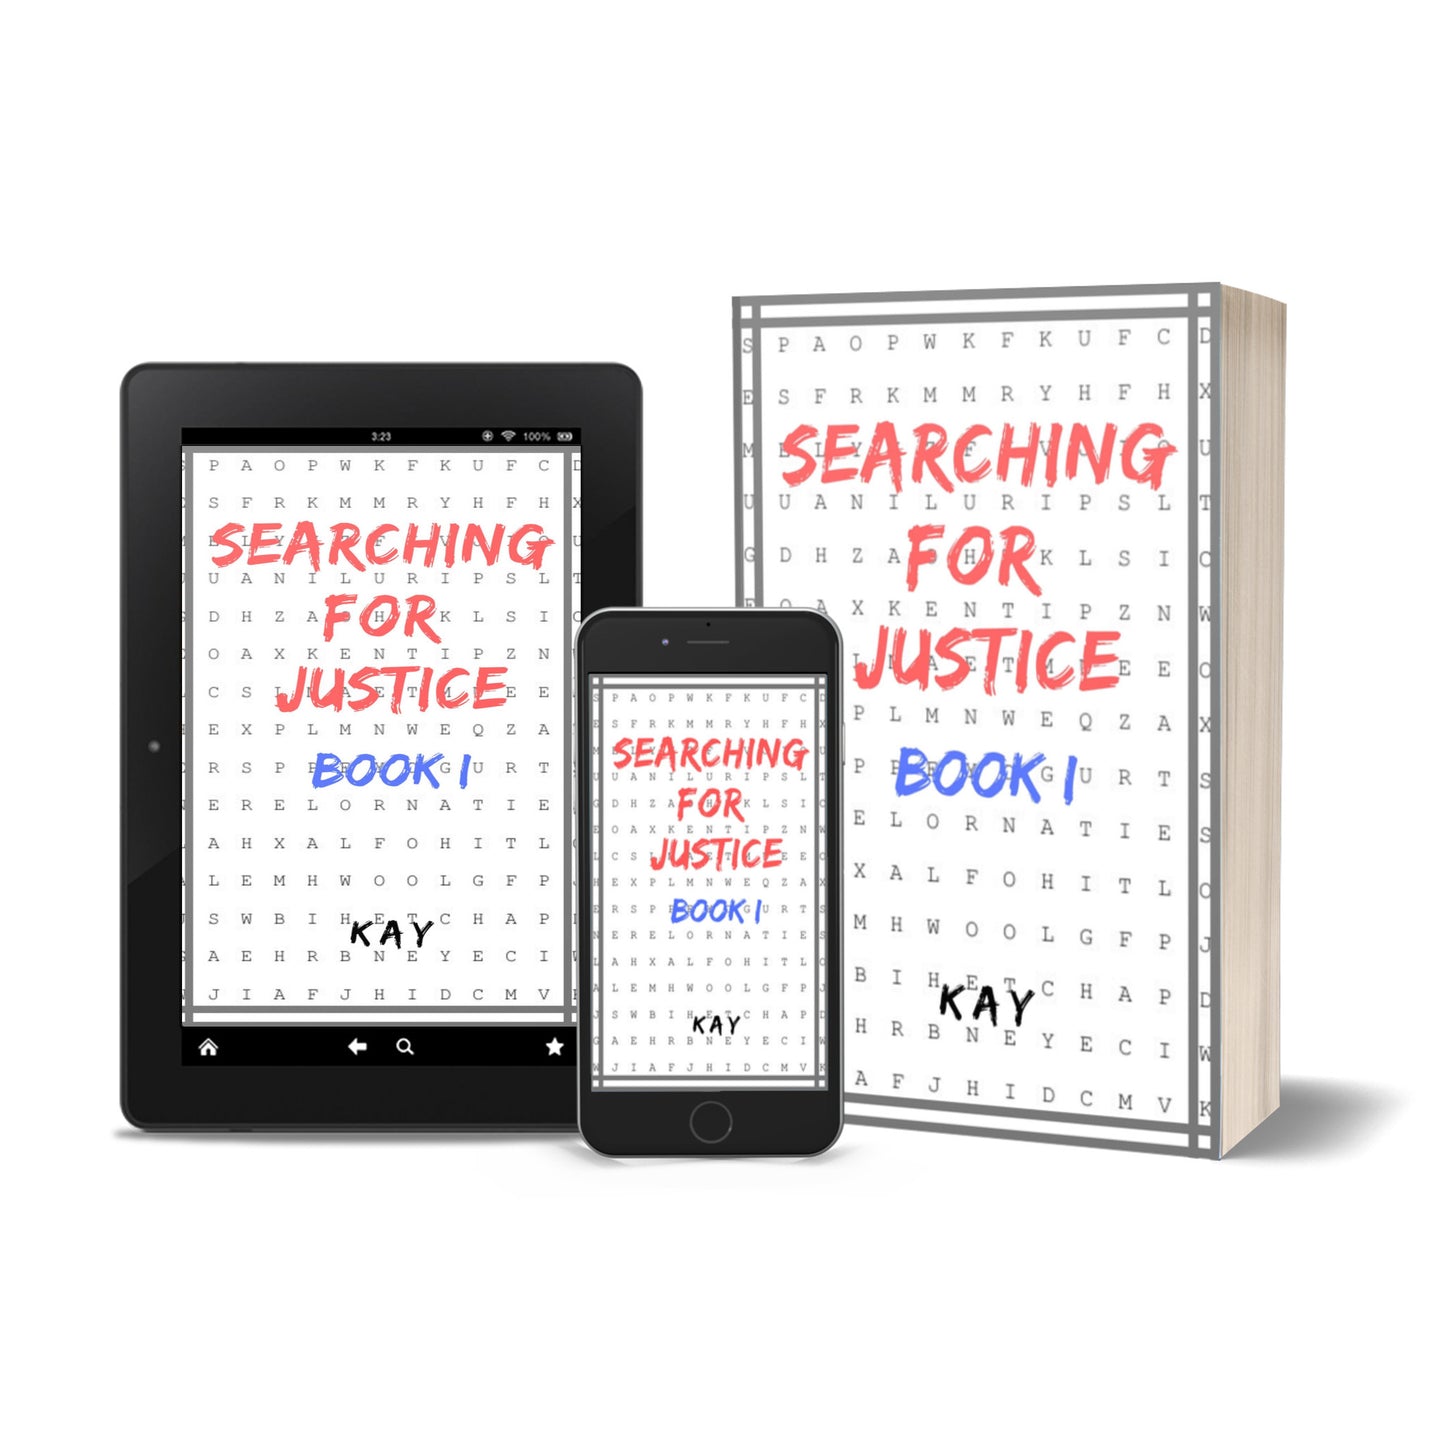 Searching for Justice Book I Digital Download